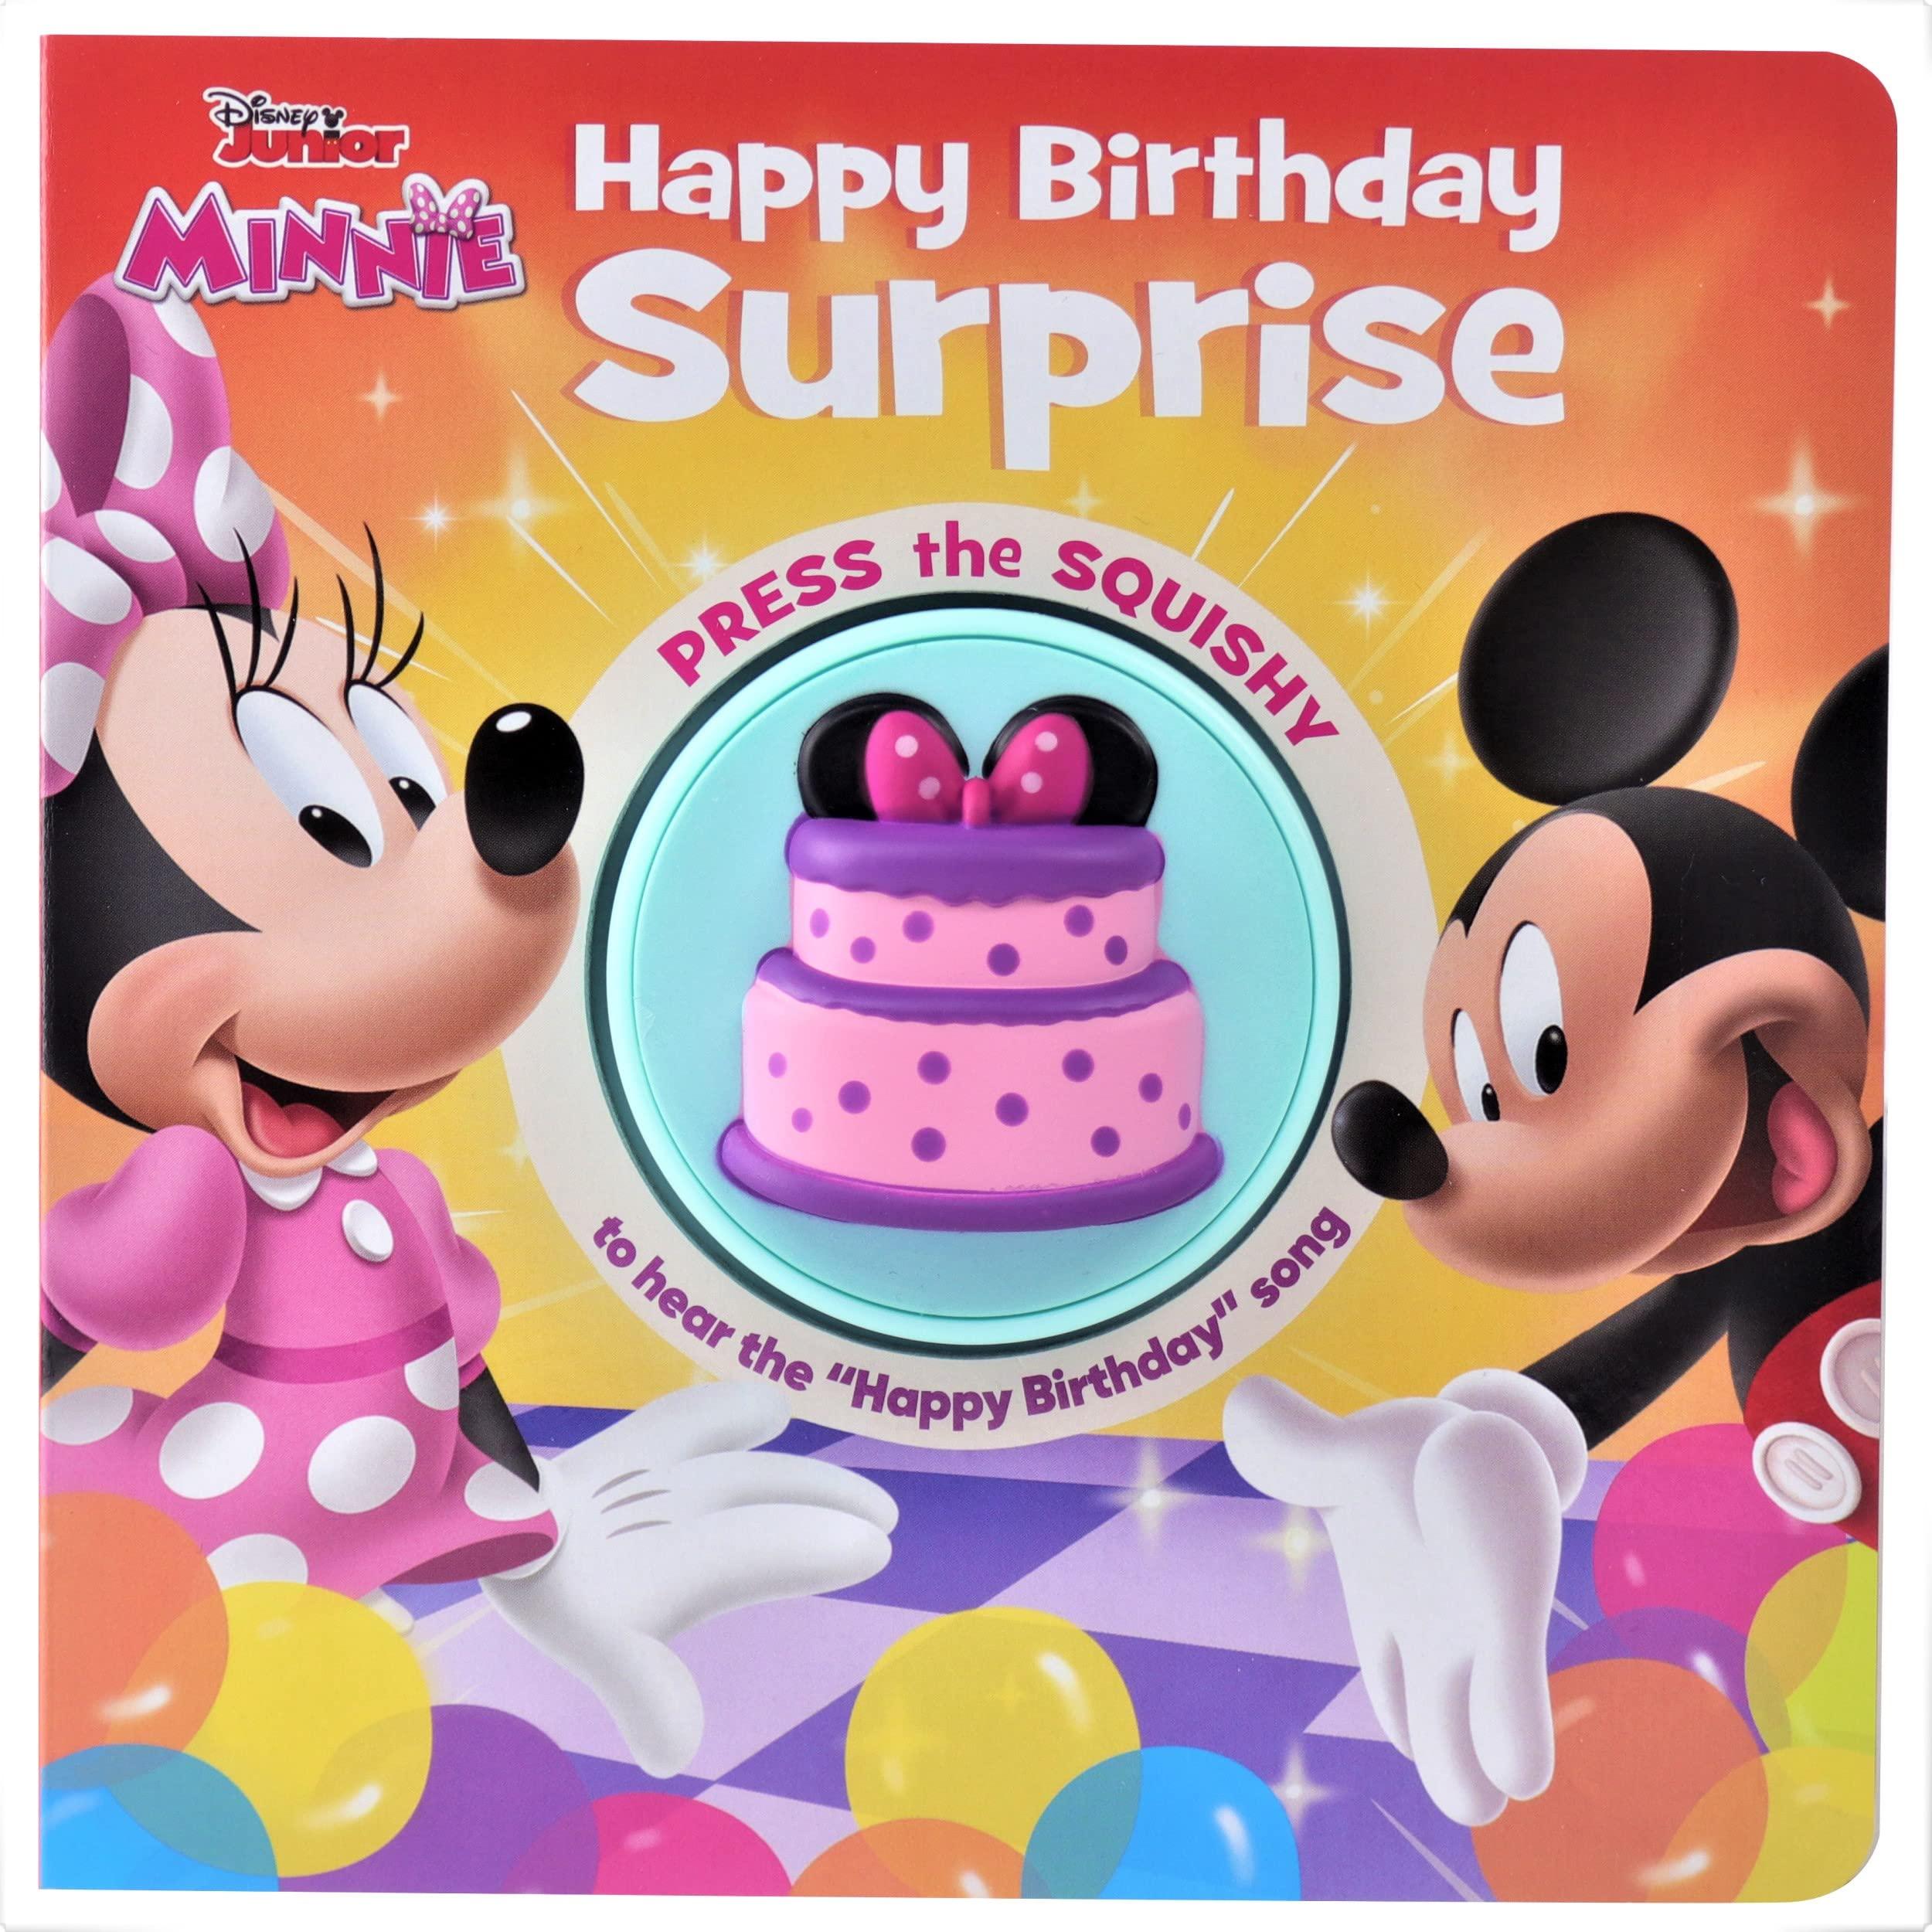 Junior Minnie Mouse - Happy Birthday Surprise! Squishy Button Sound Book - Satisfying Tactile and Sensory Play - Ourkids - OKO